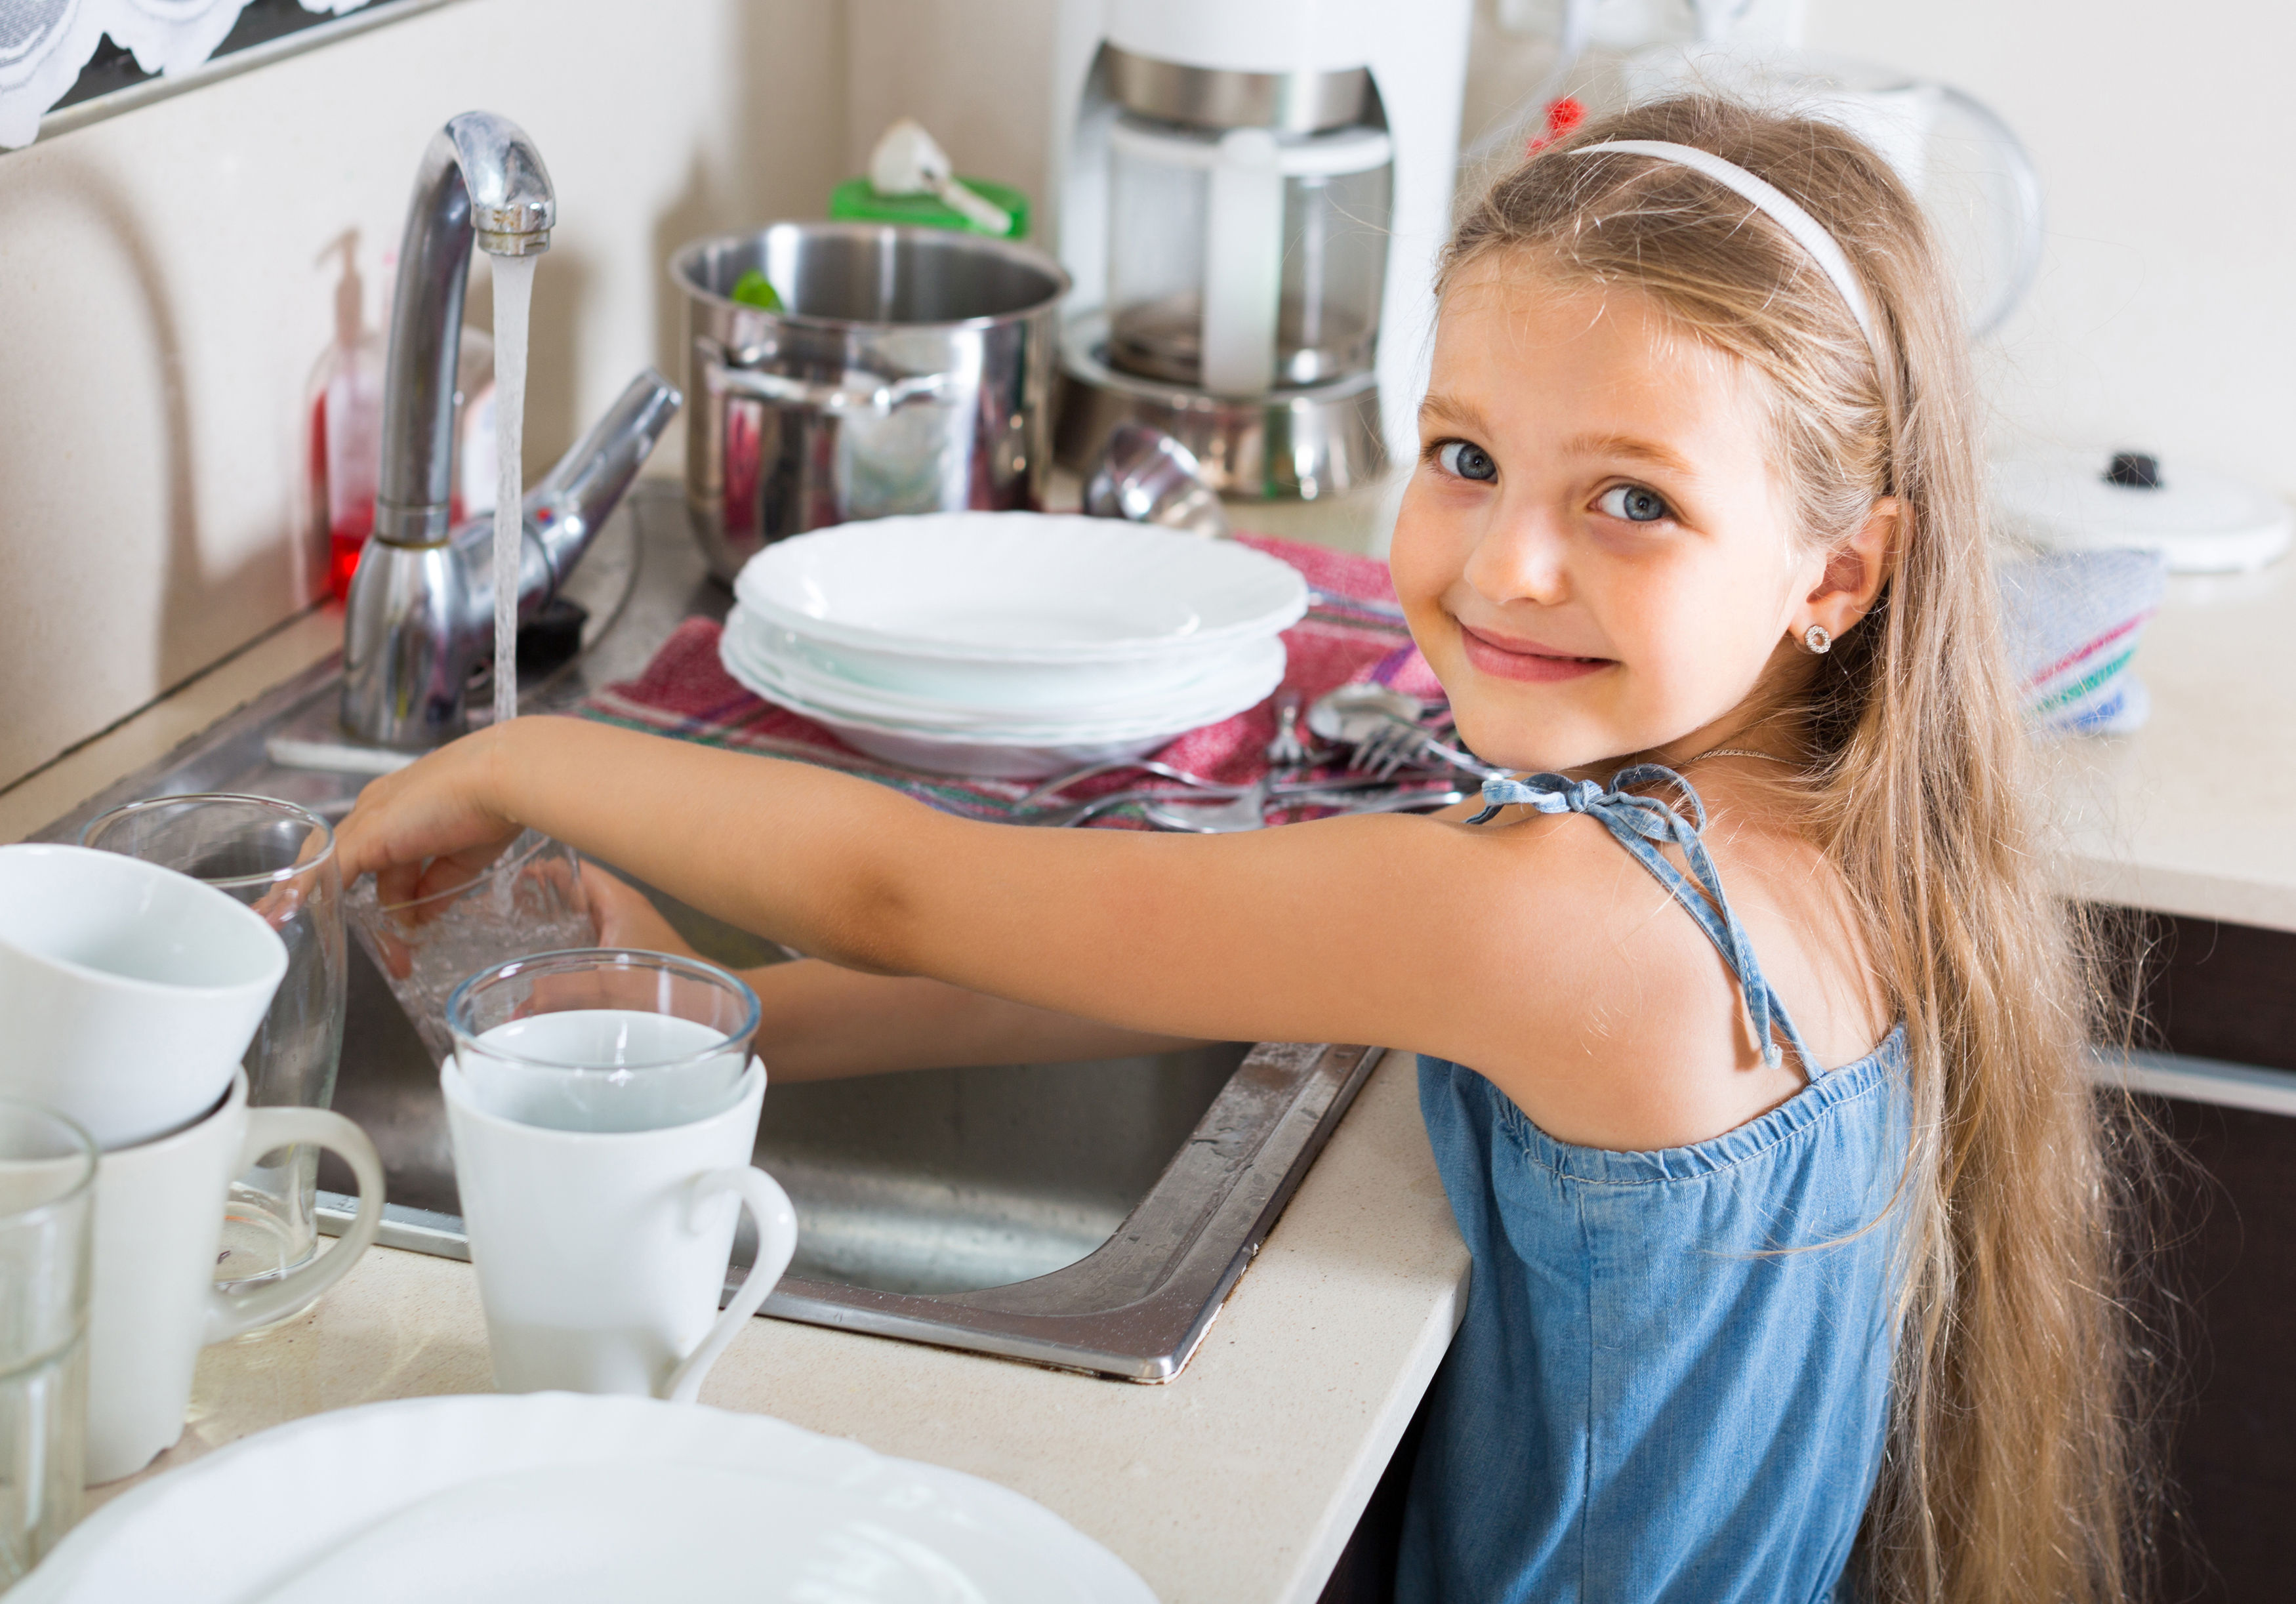 Chores should be age-appropriate and shouldn't take too much of your child's time. 